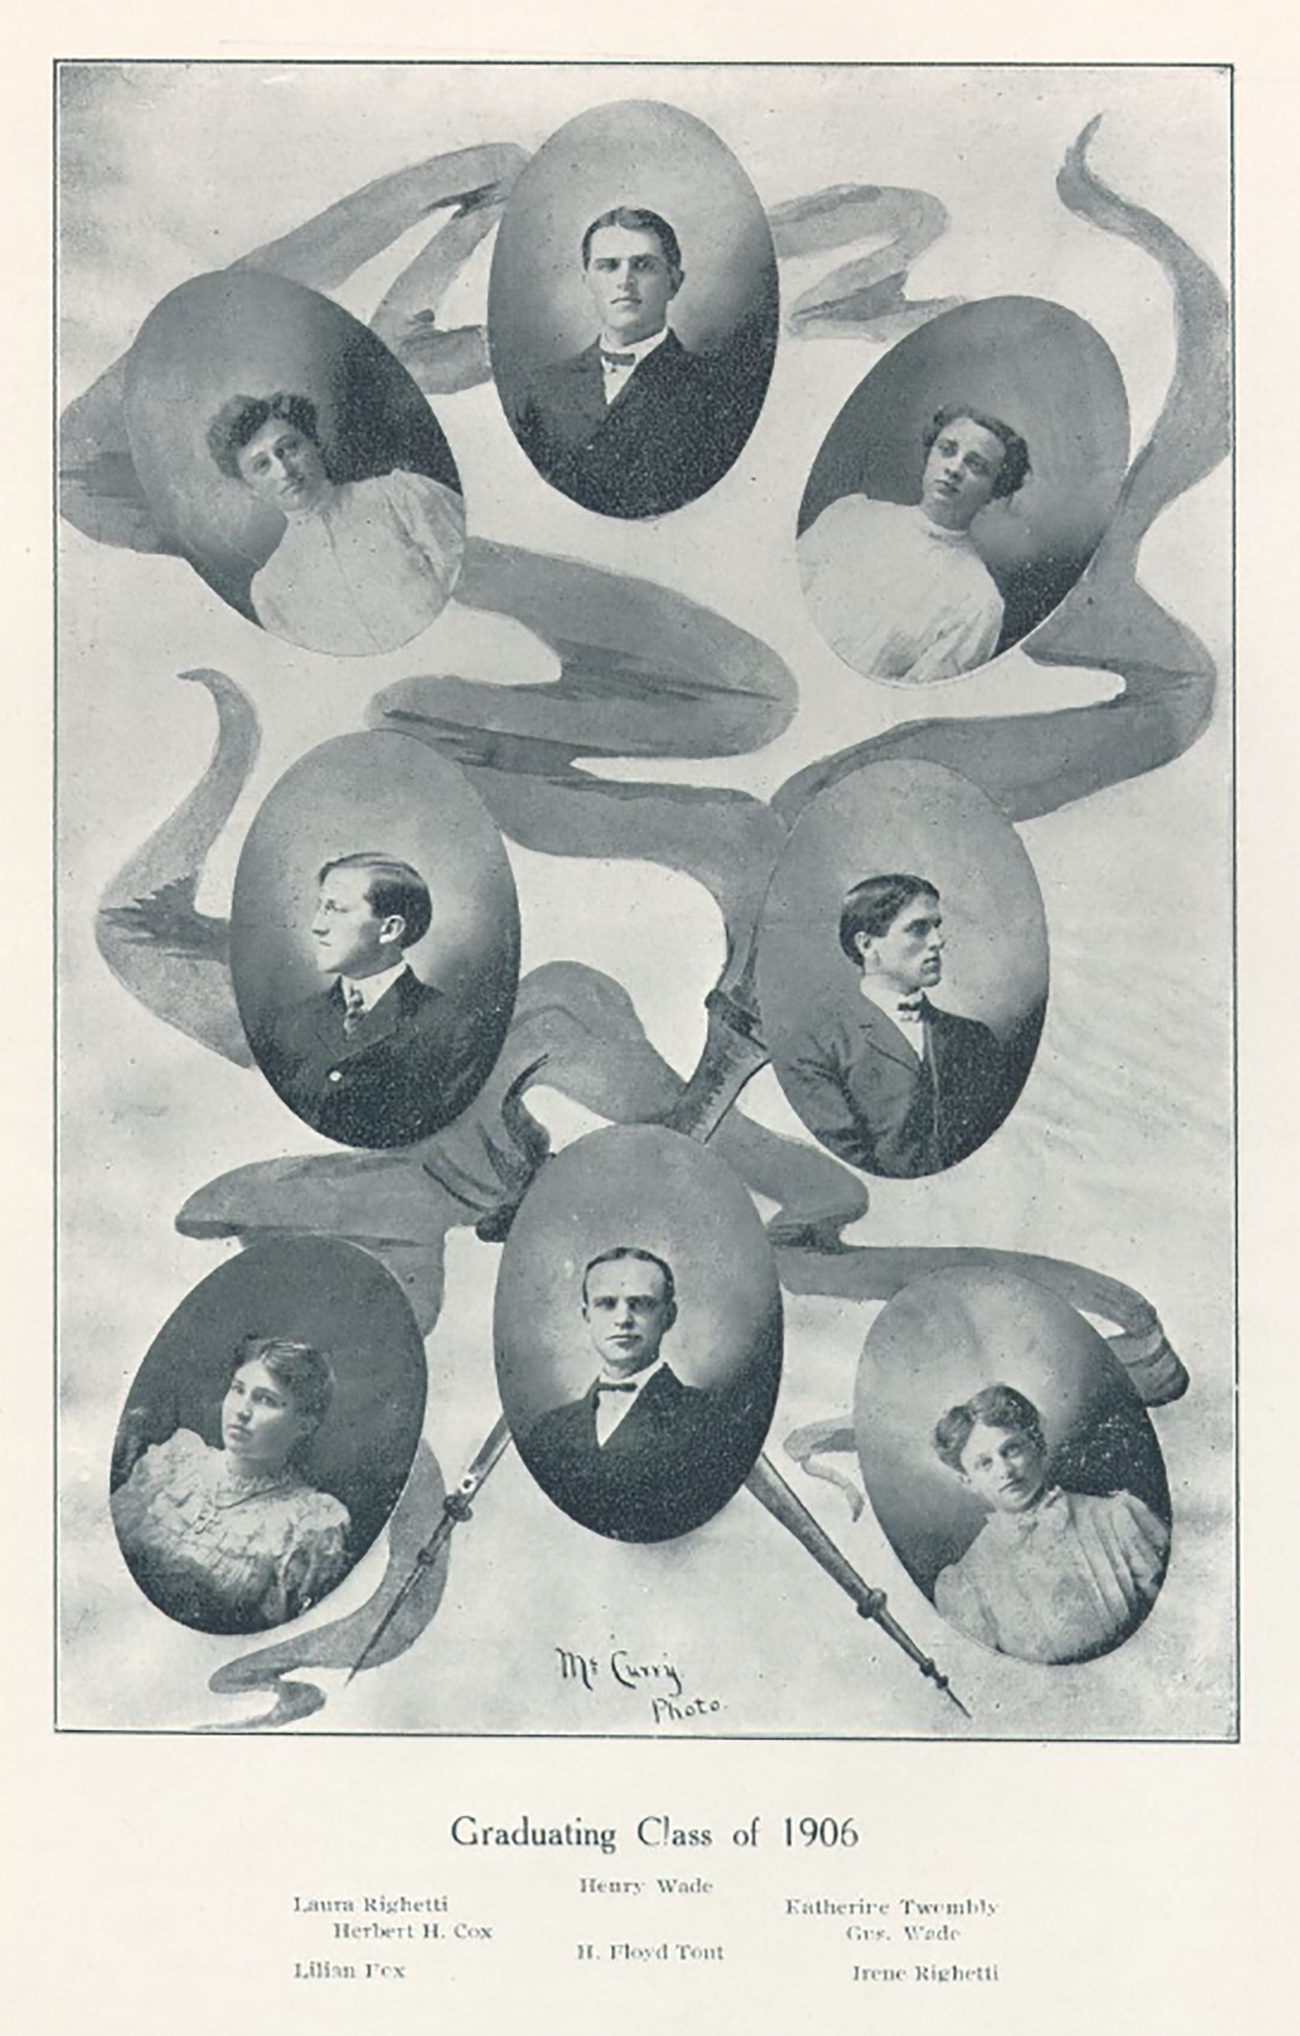 A page from a vintage Cal Poly yearbook diplaying the portraits of 8 graduates from the class of 1906.